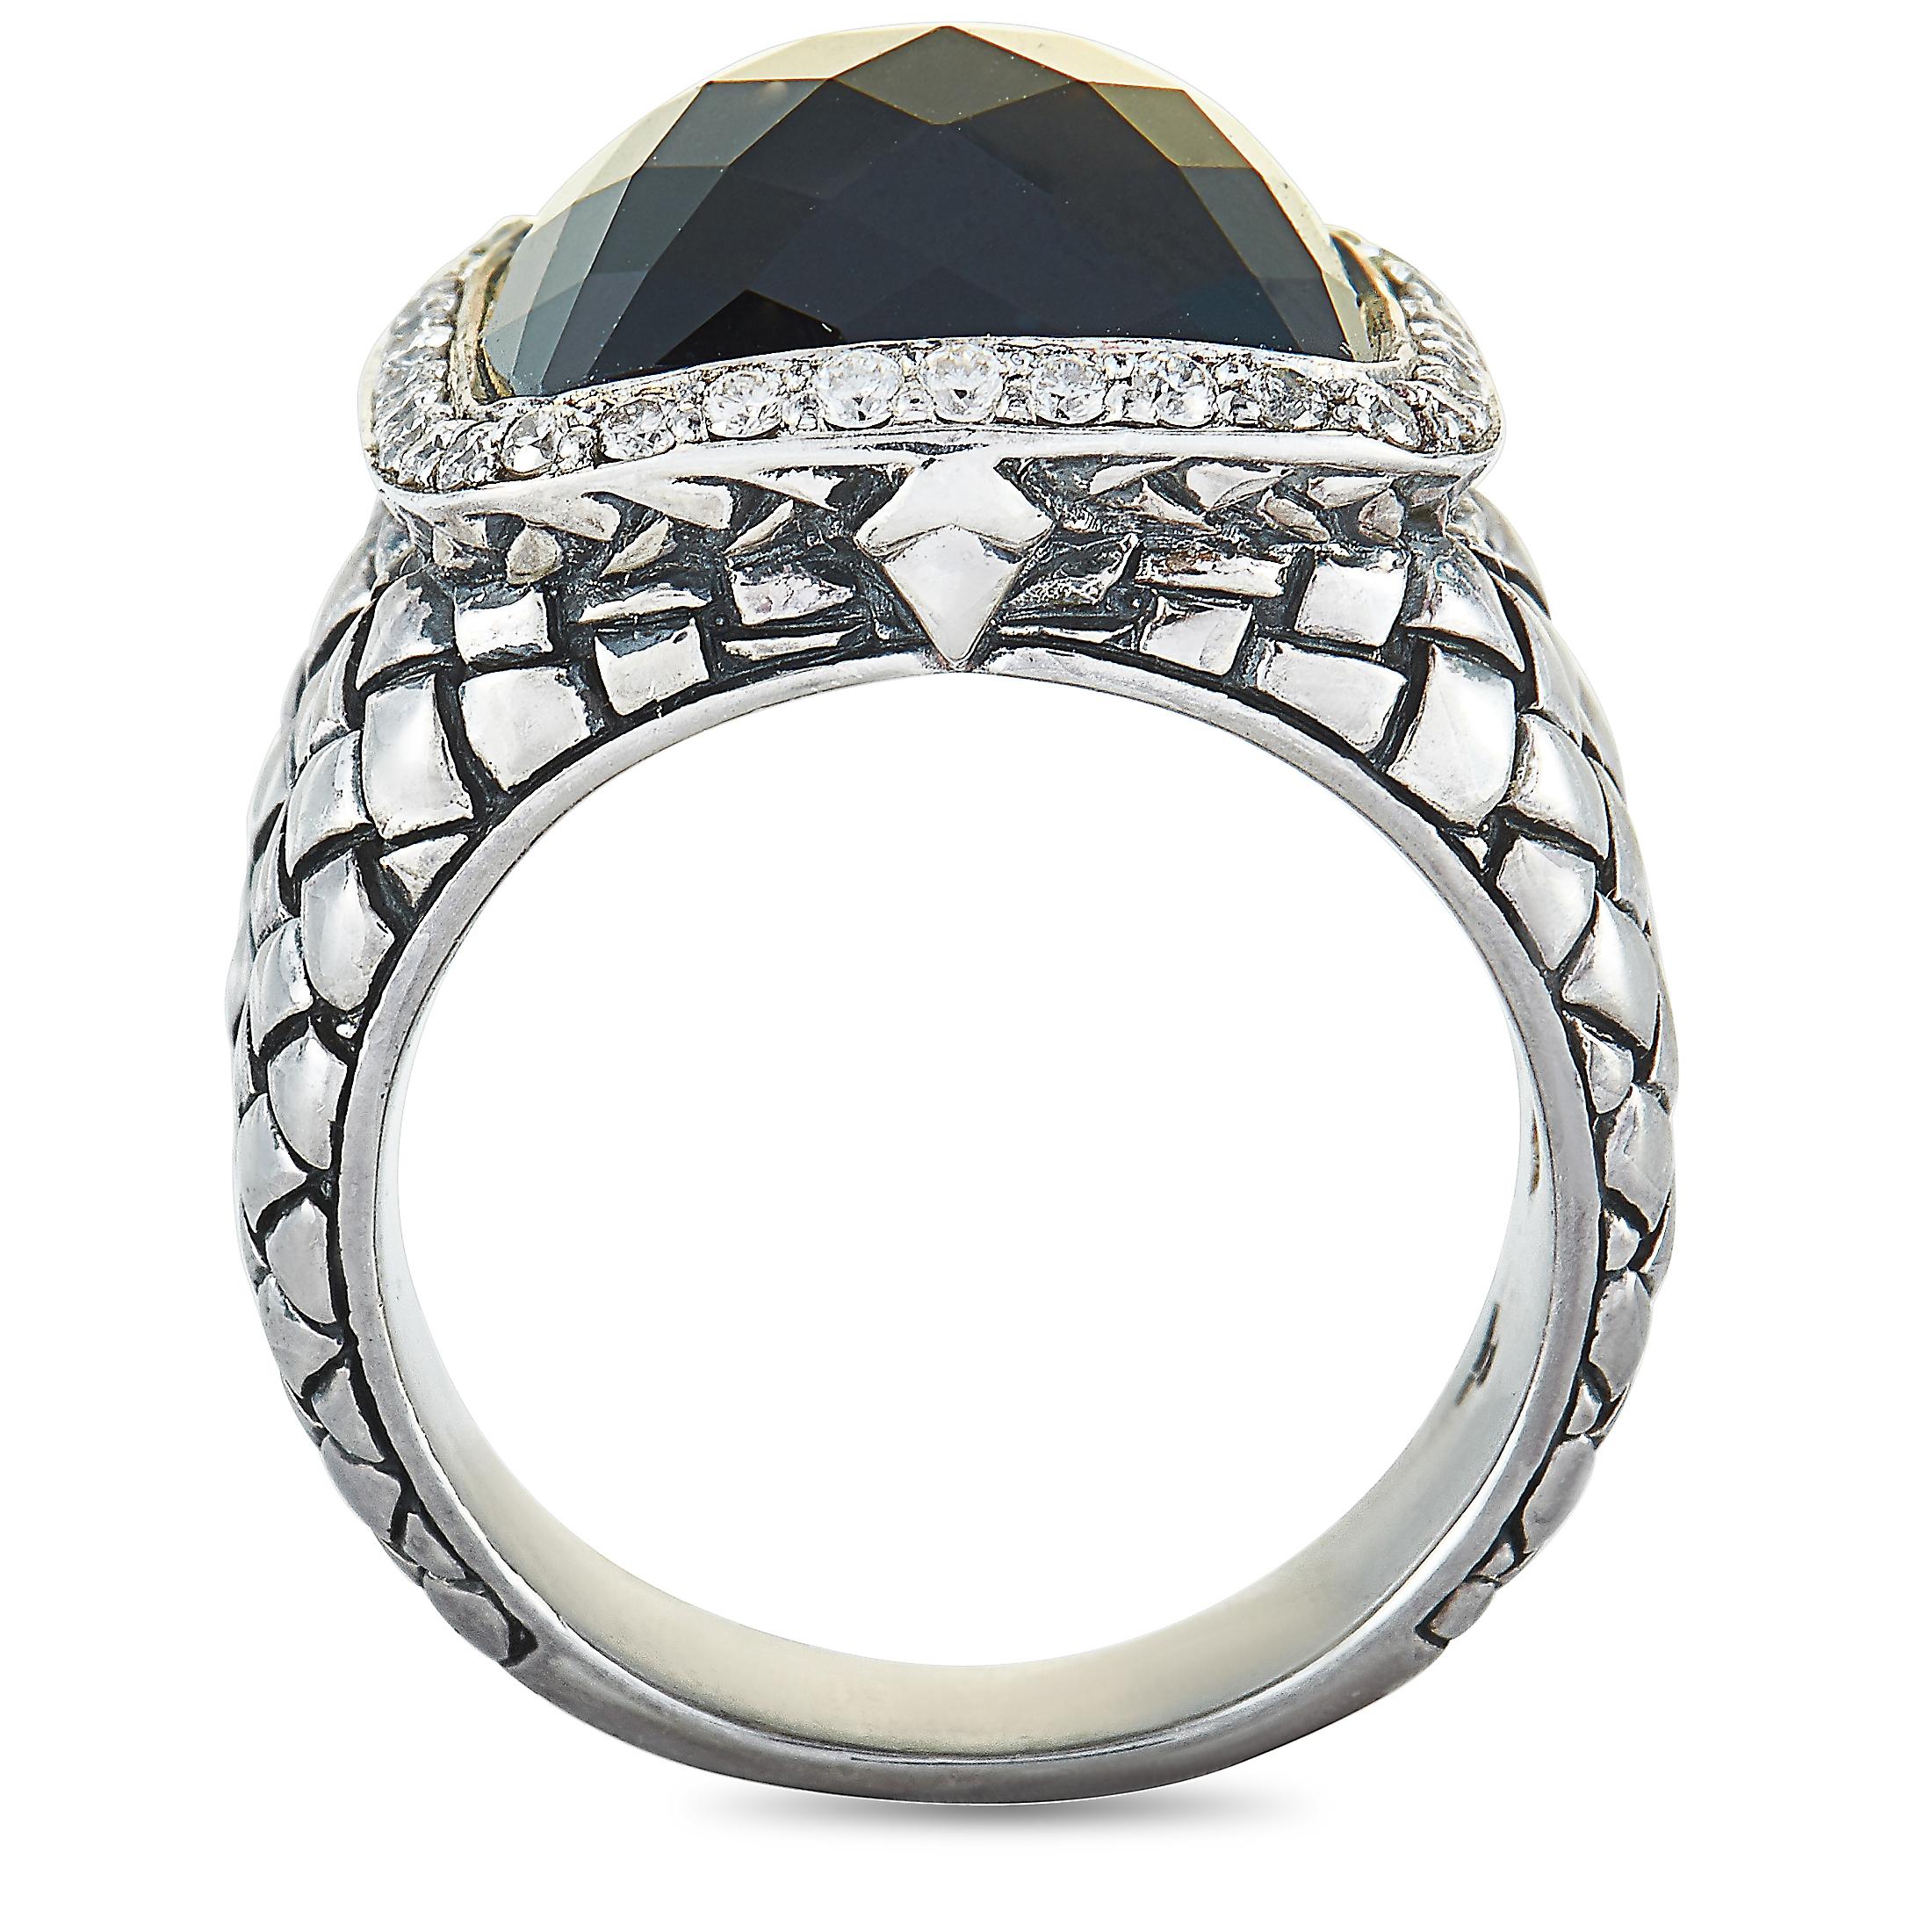 This Scott Kay ring is crafted from sterling silver and weighs 14 grams, boasting band thickness of 5 mm and top height of 9 mm, while top dimensions measure 17 by 17 mm. The ring is set with diamonds and an onyx.

Offered in brand new condition,